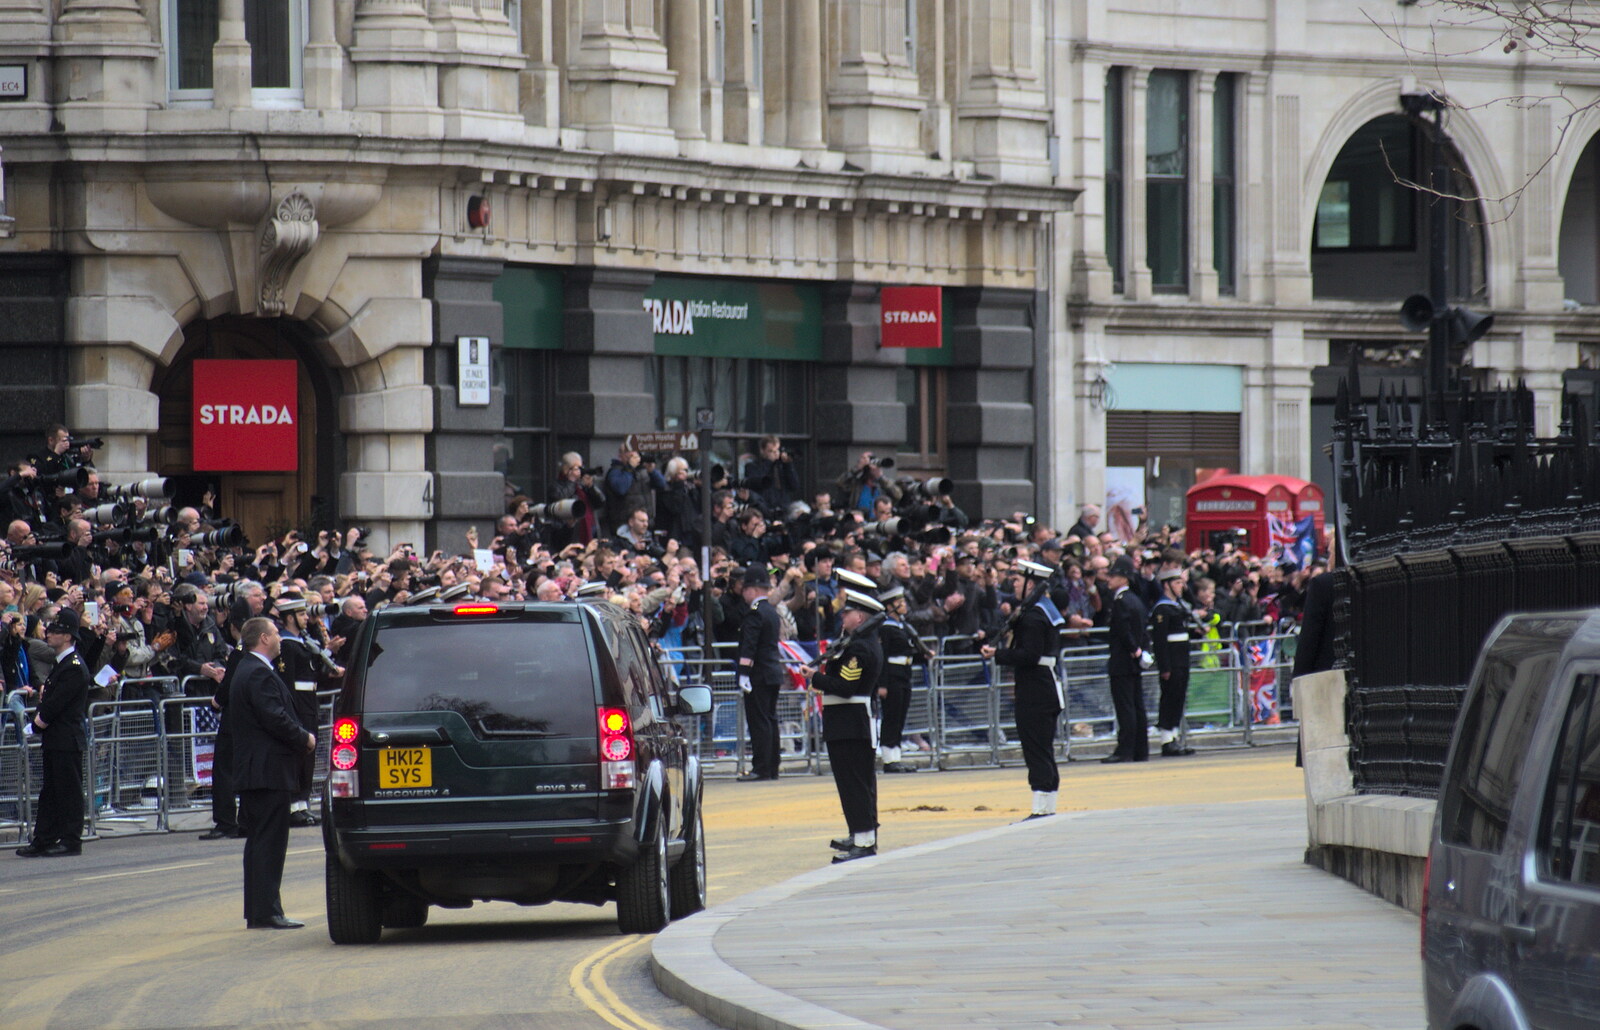 A heavily-armed Land Rover unit roams around from Margaret Thatcher's Funeral, St. Paul's, London - 17th April 2013